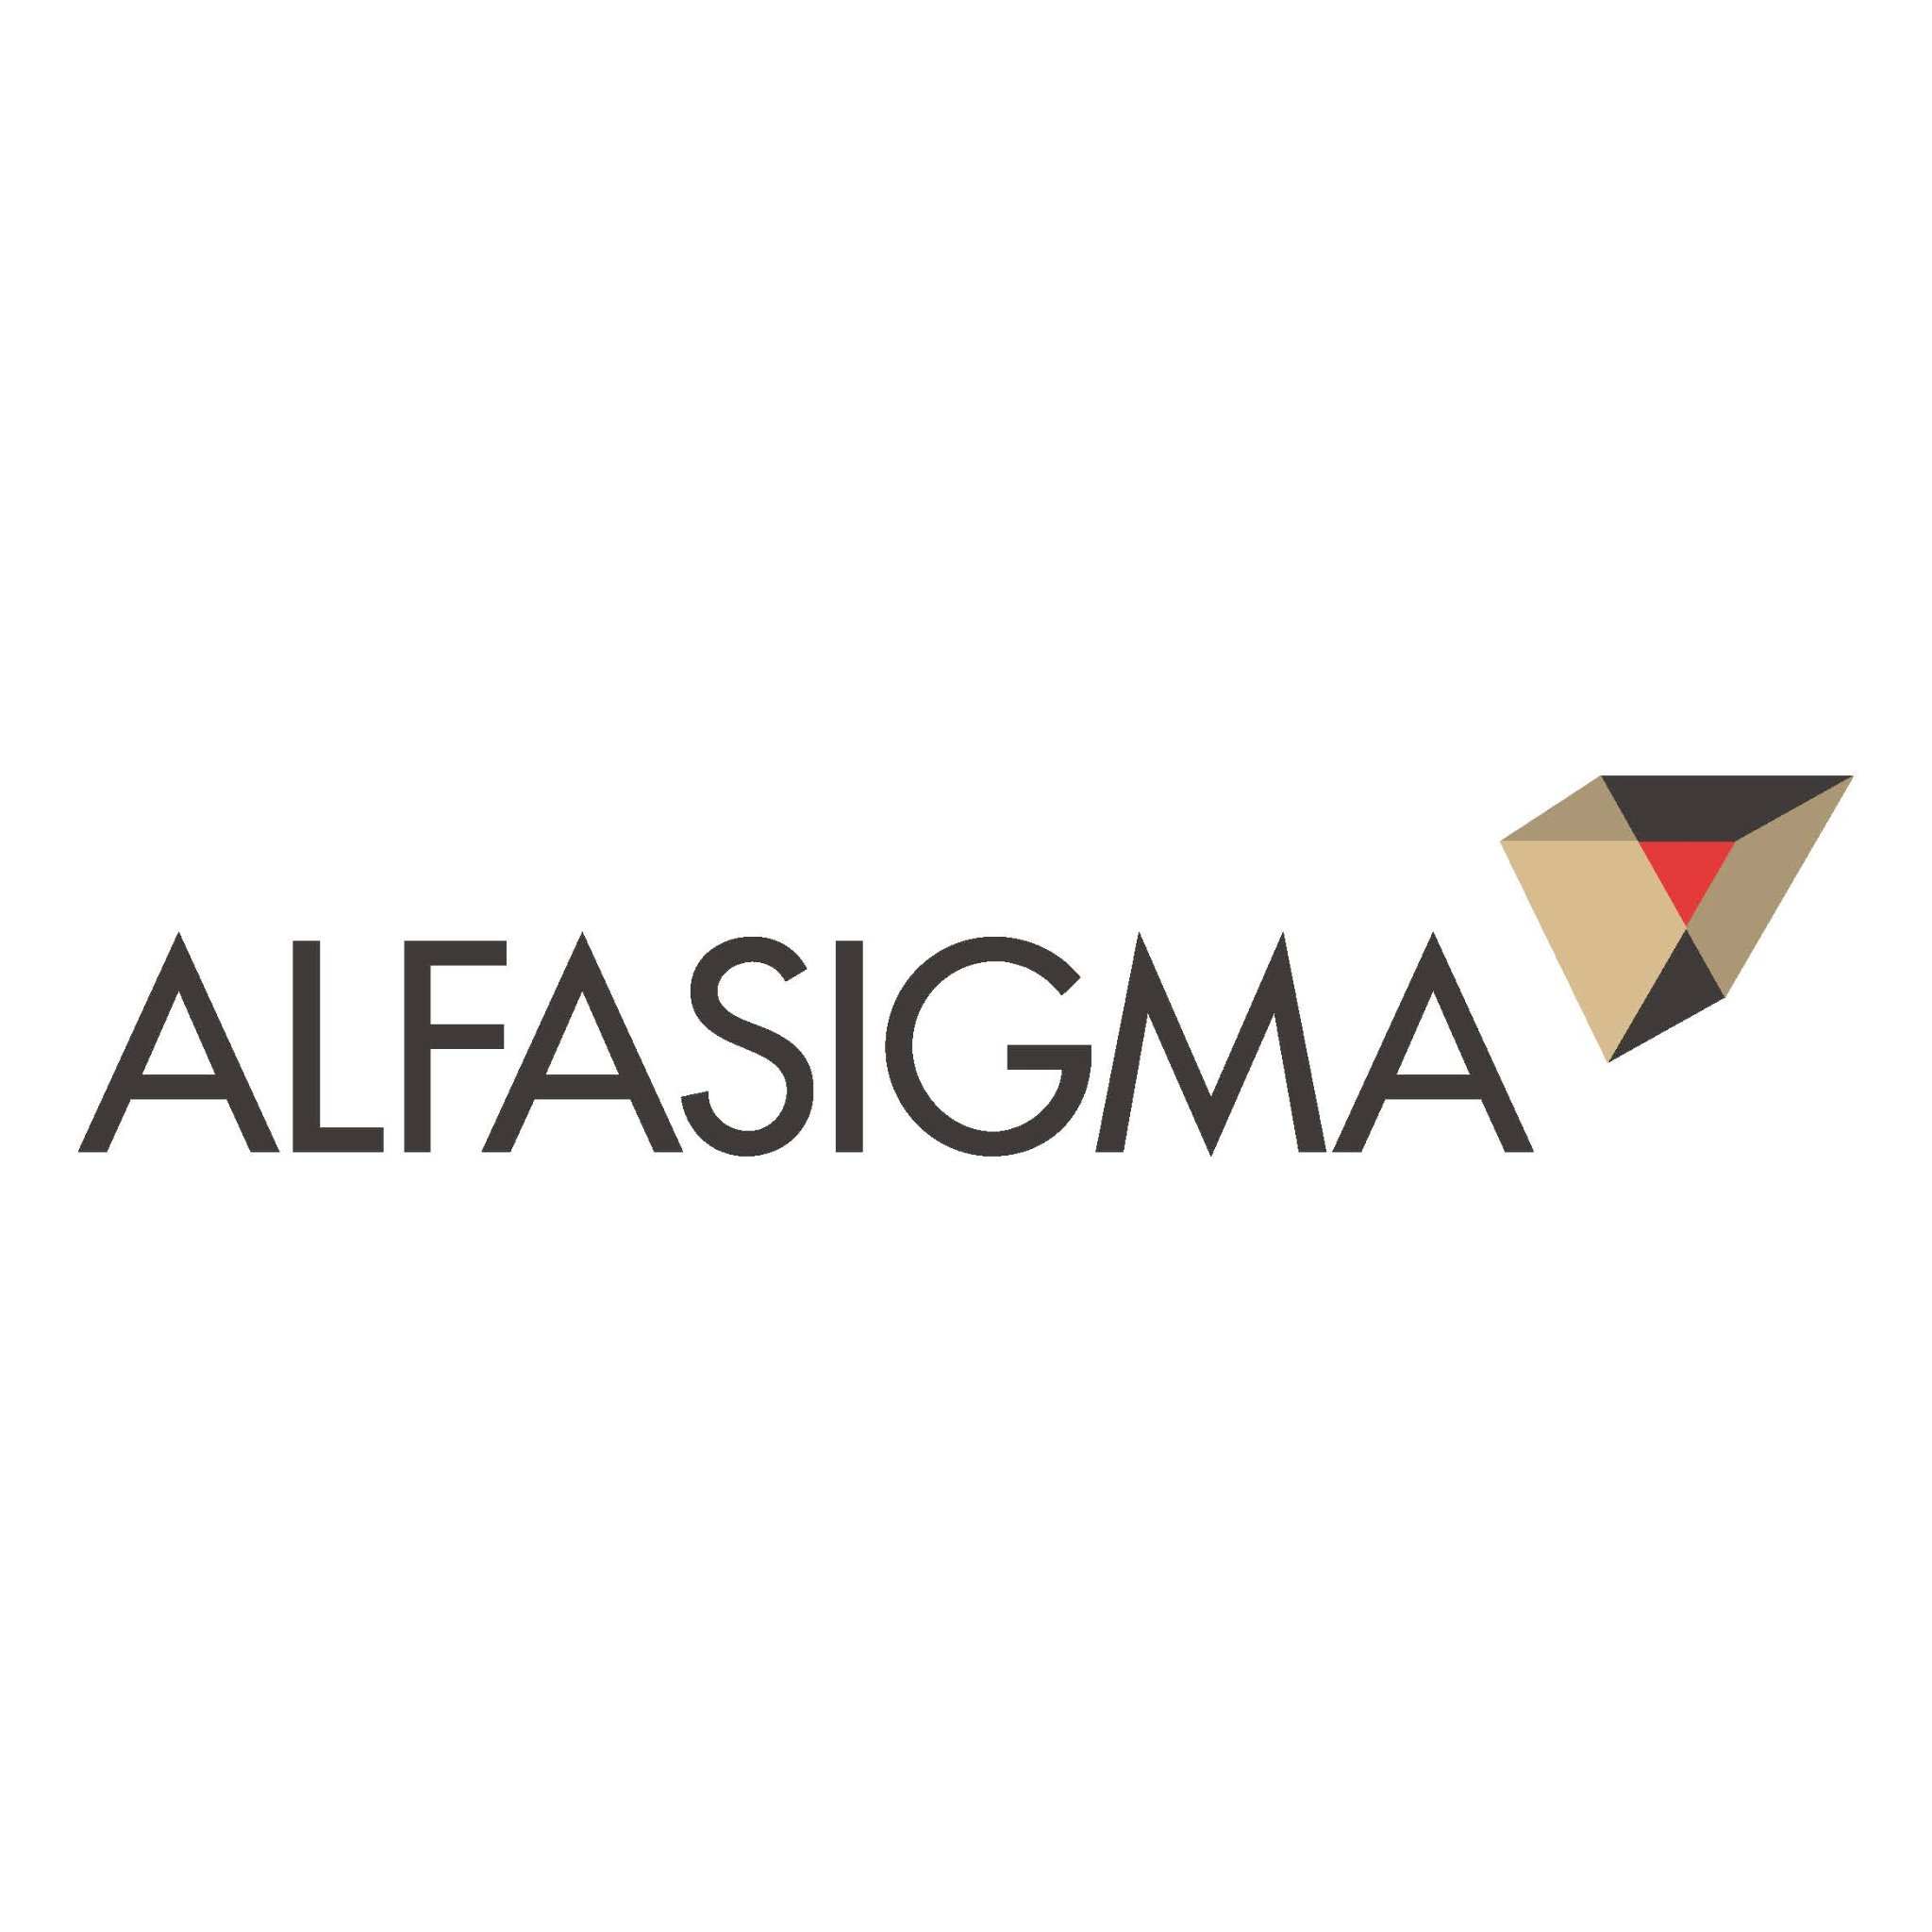 AlfasigmaUSA produces medical foods for the clinical dietary management of several specific conditions.  Learn more at: https://t.co/CH4bbtiVQn